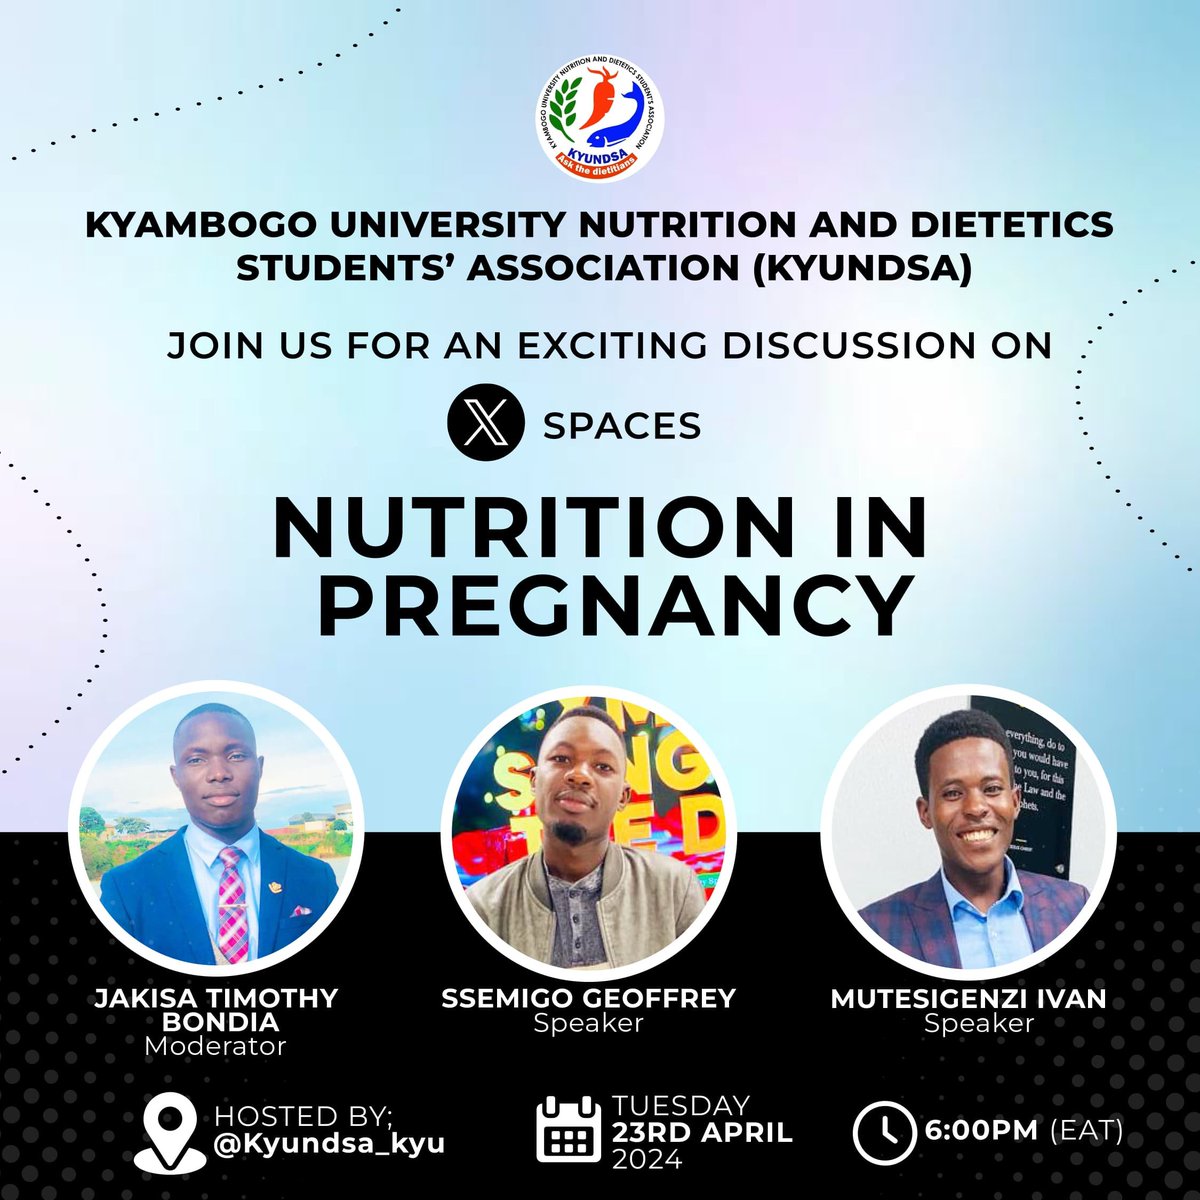 Nutrition during pregnancy is crucial for both mother and baby's health. Join us for  an insightful discussion on nutrition in pregnancy. Discover the key nutrients every expectant mother needs #pregnancynutrition
#healthymomhealthybaby x.com/i/spaces/1dRJZ…